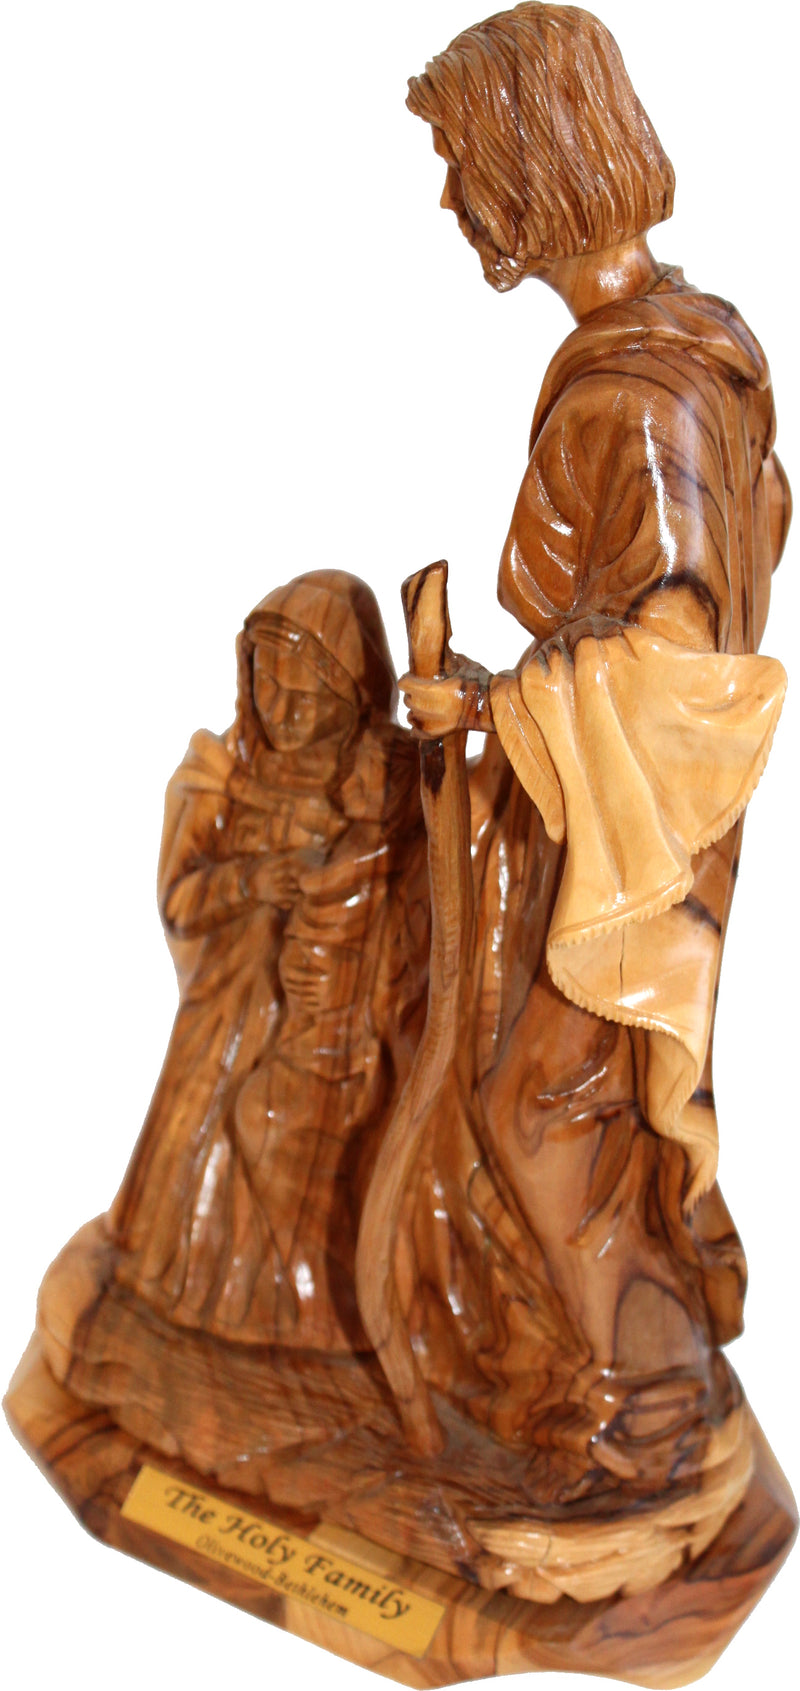 Holy Family Olive Wood Statue - Museum Quality - Model II (28 cm or 11 inches high)